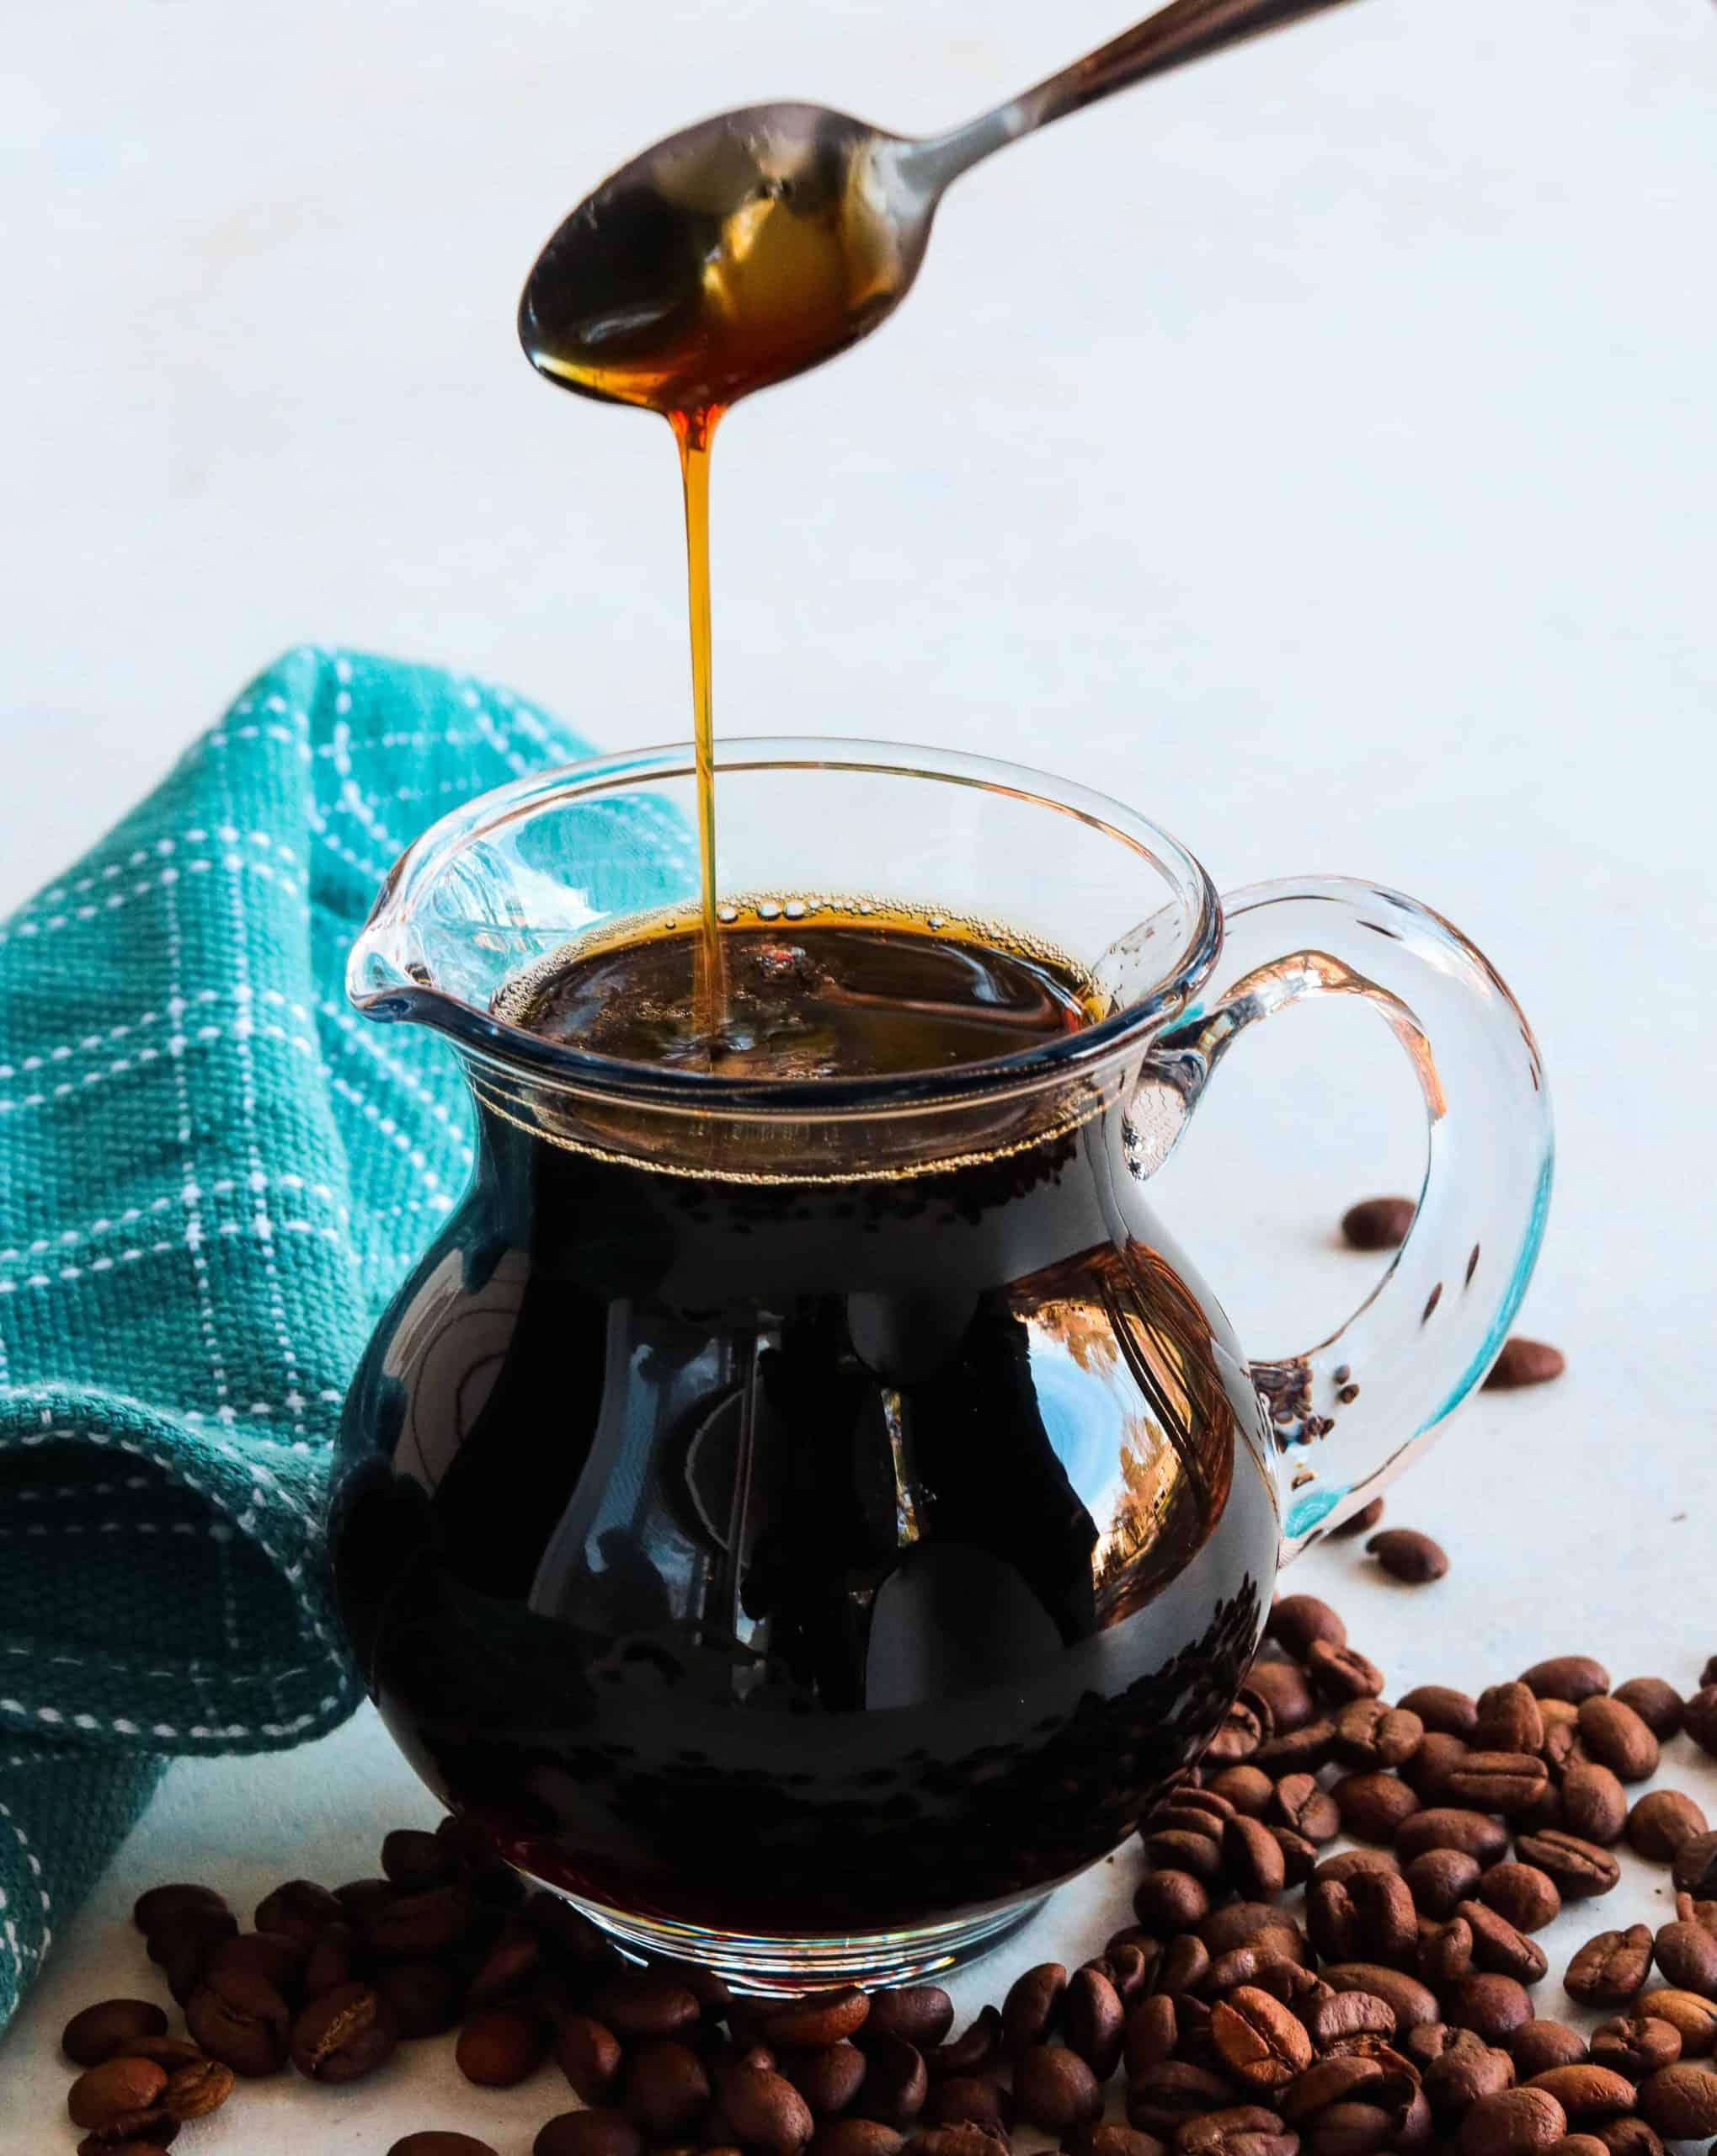 Coffee-Flavored Syrup Recipe & Things To Do With Coffee- Southern Plate